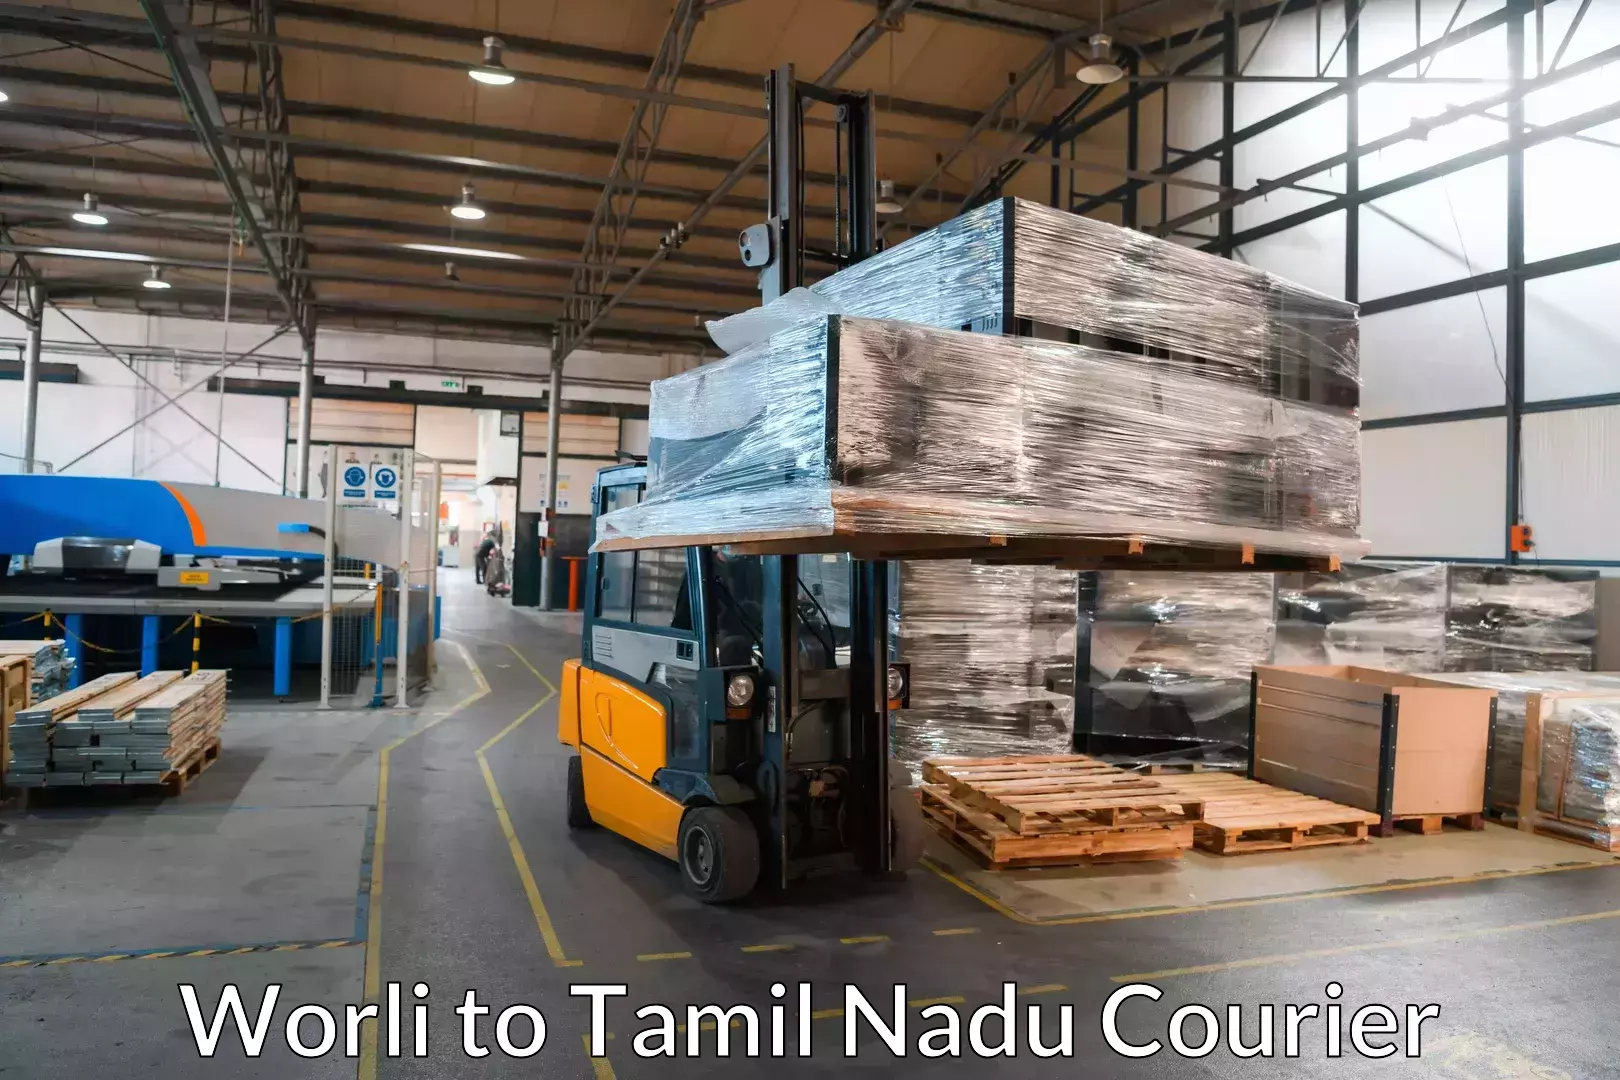 Affordable relocation services Worli to Tamil Nadu